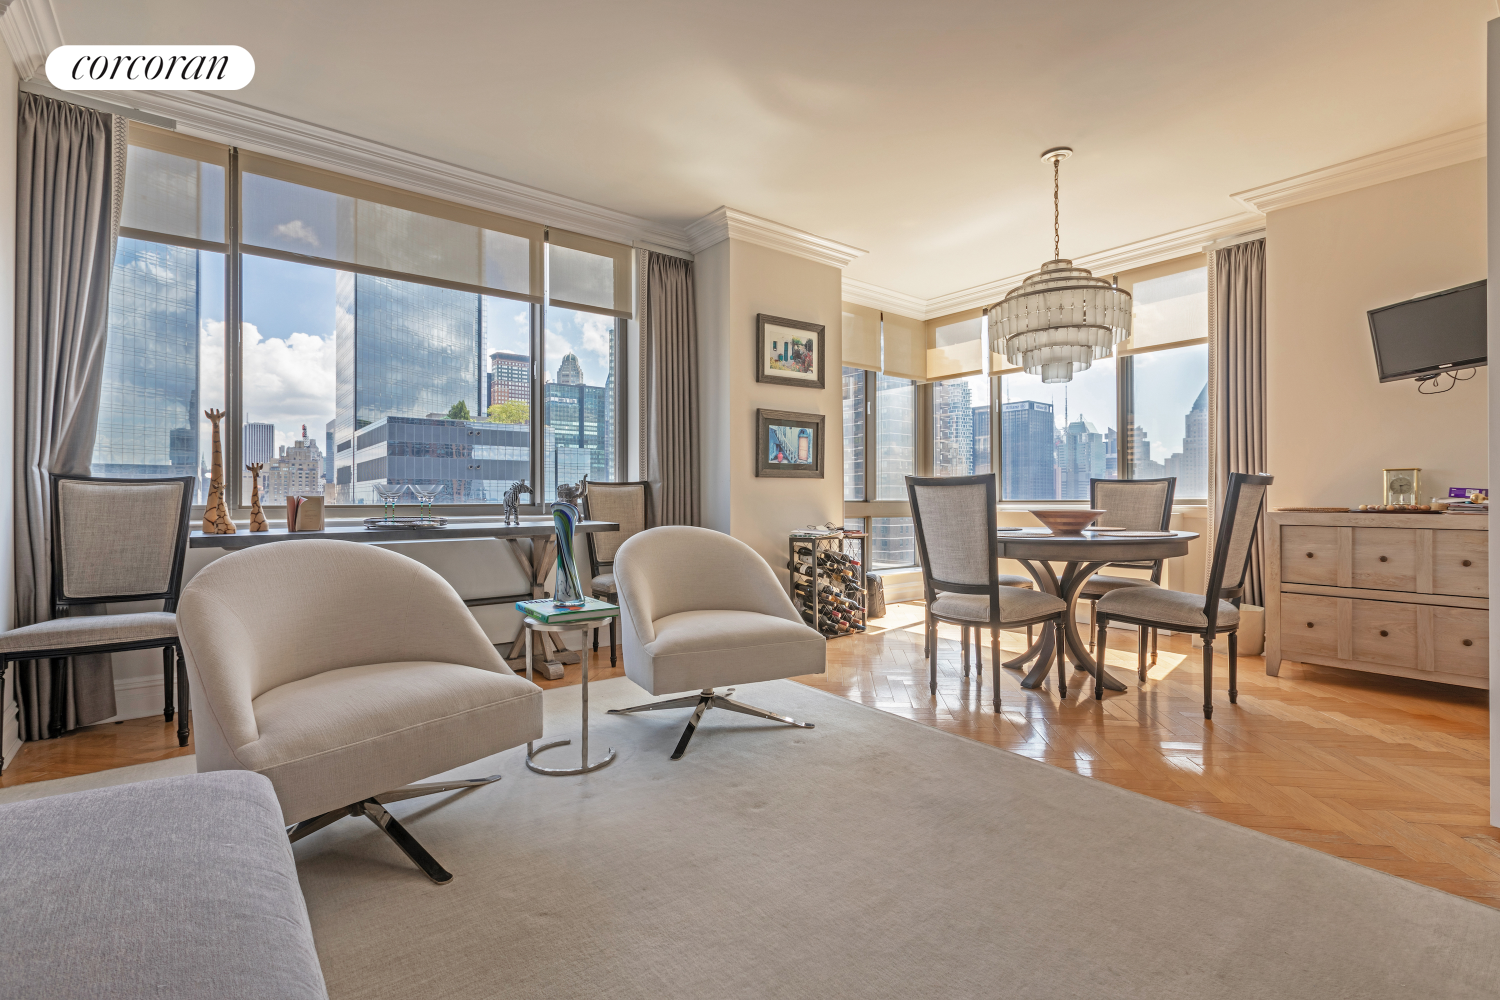 2 Columbus Avenue 31C, Lincoln Sq, Upper West Side, NYC - 2 Bedrooms  
2.5 Bathrooms  
7 Rooms - 